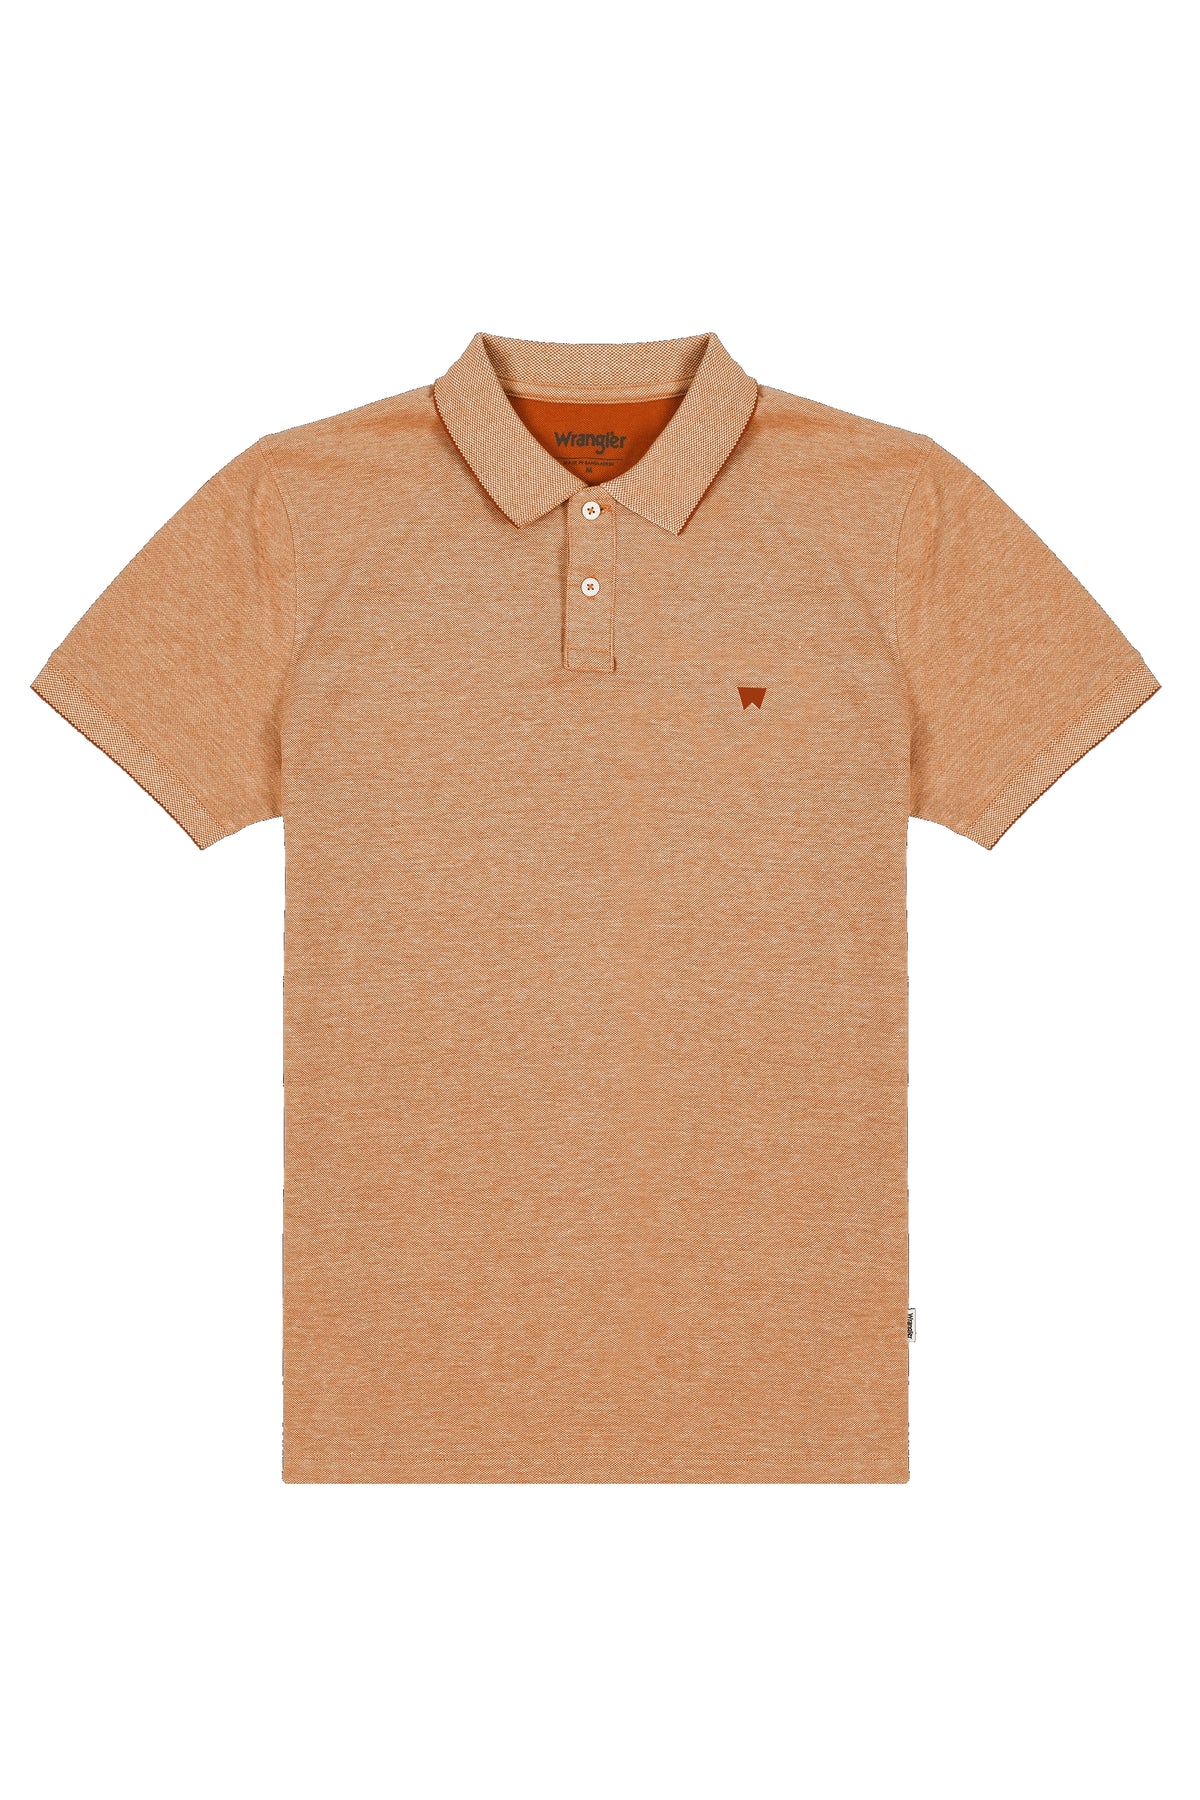 Refined Polo Shirt in Burro Brown